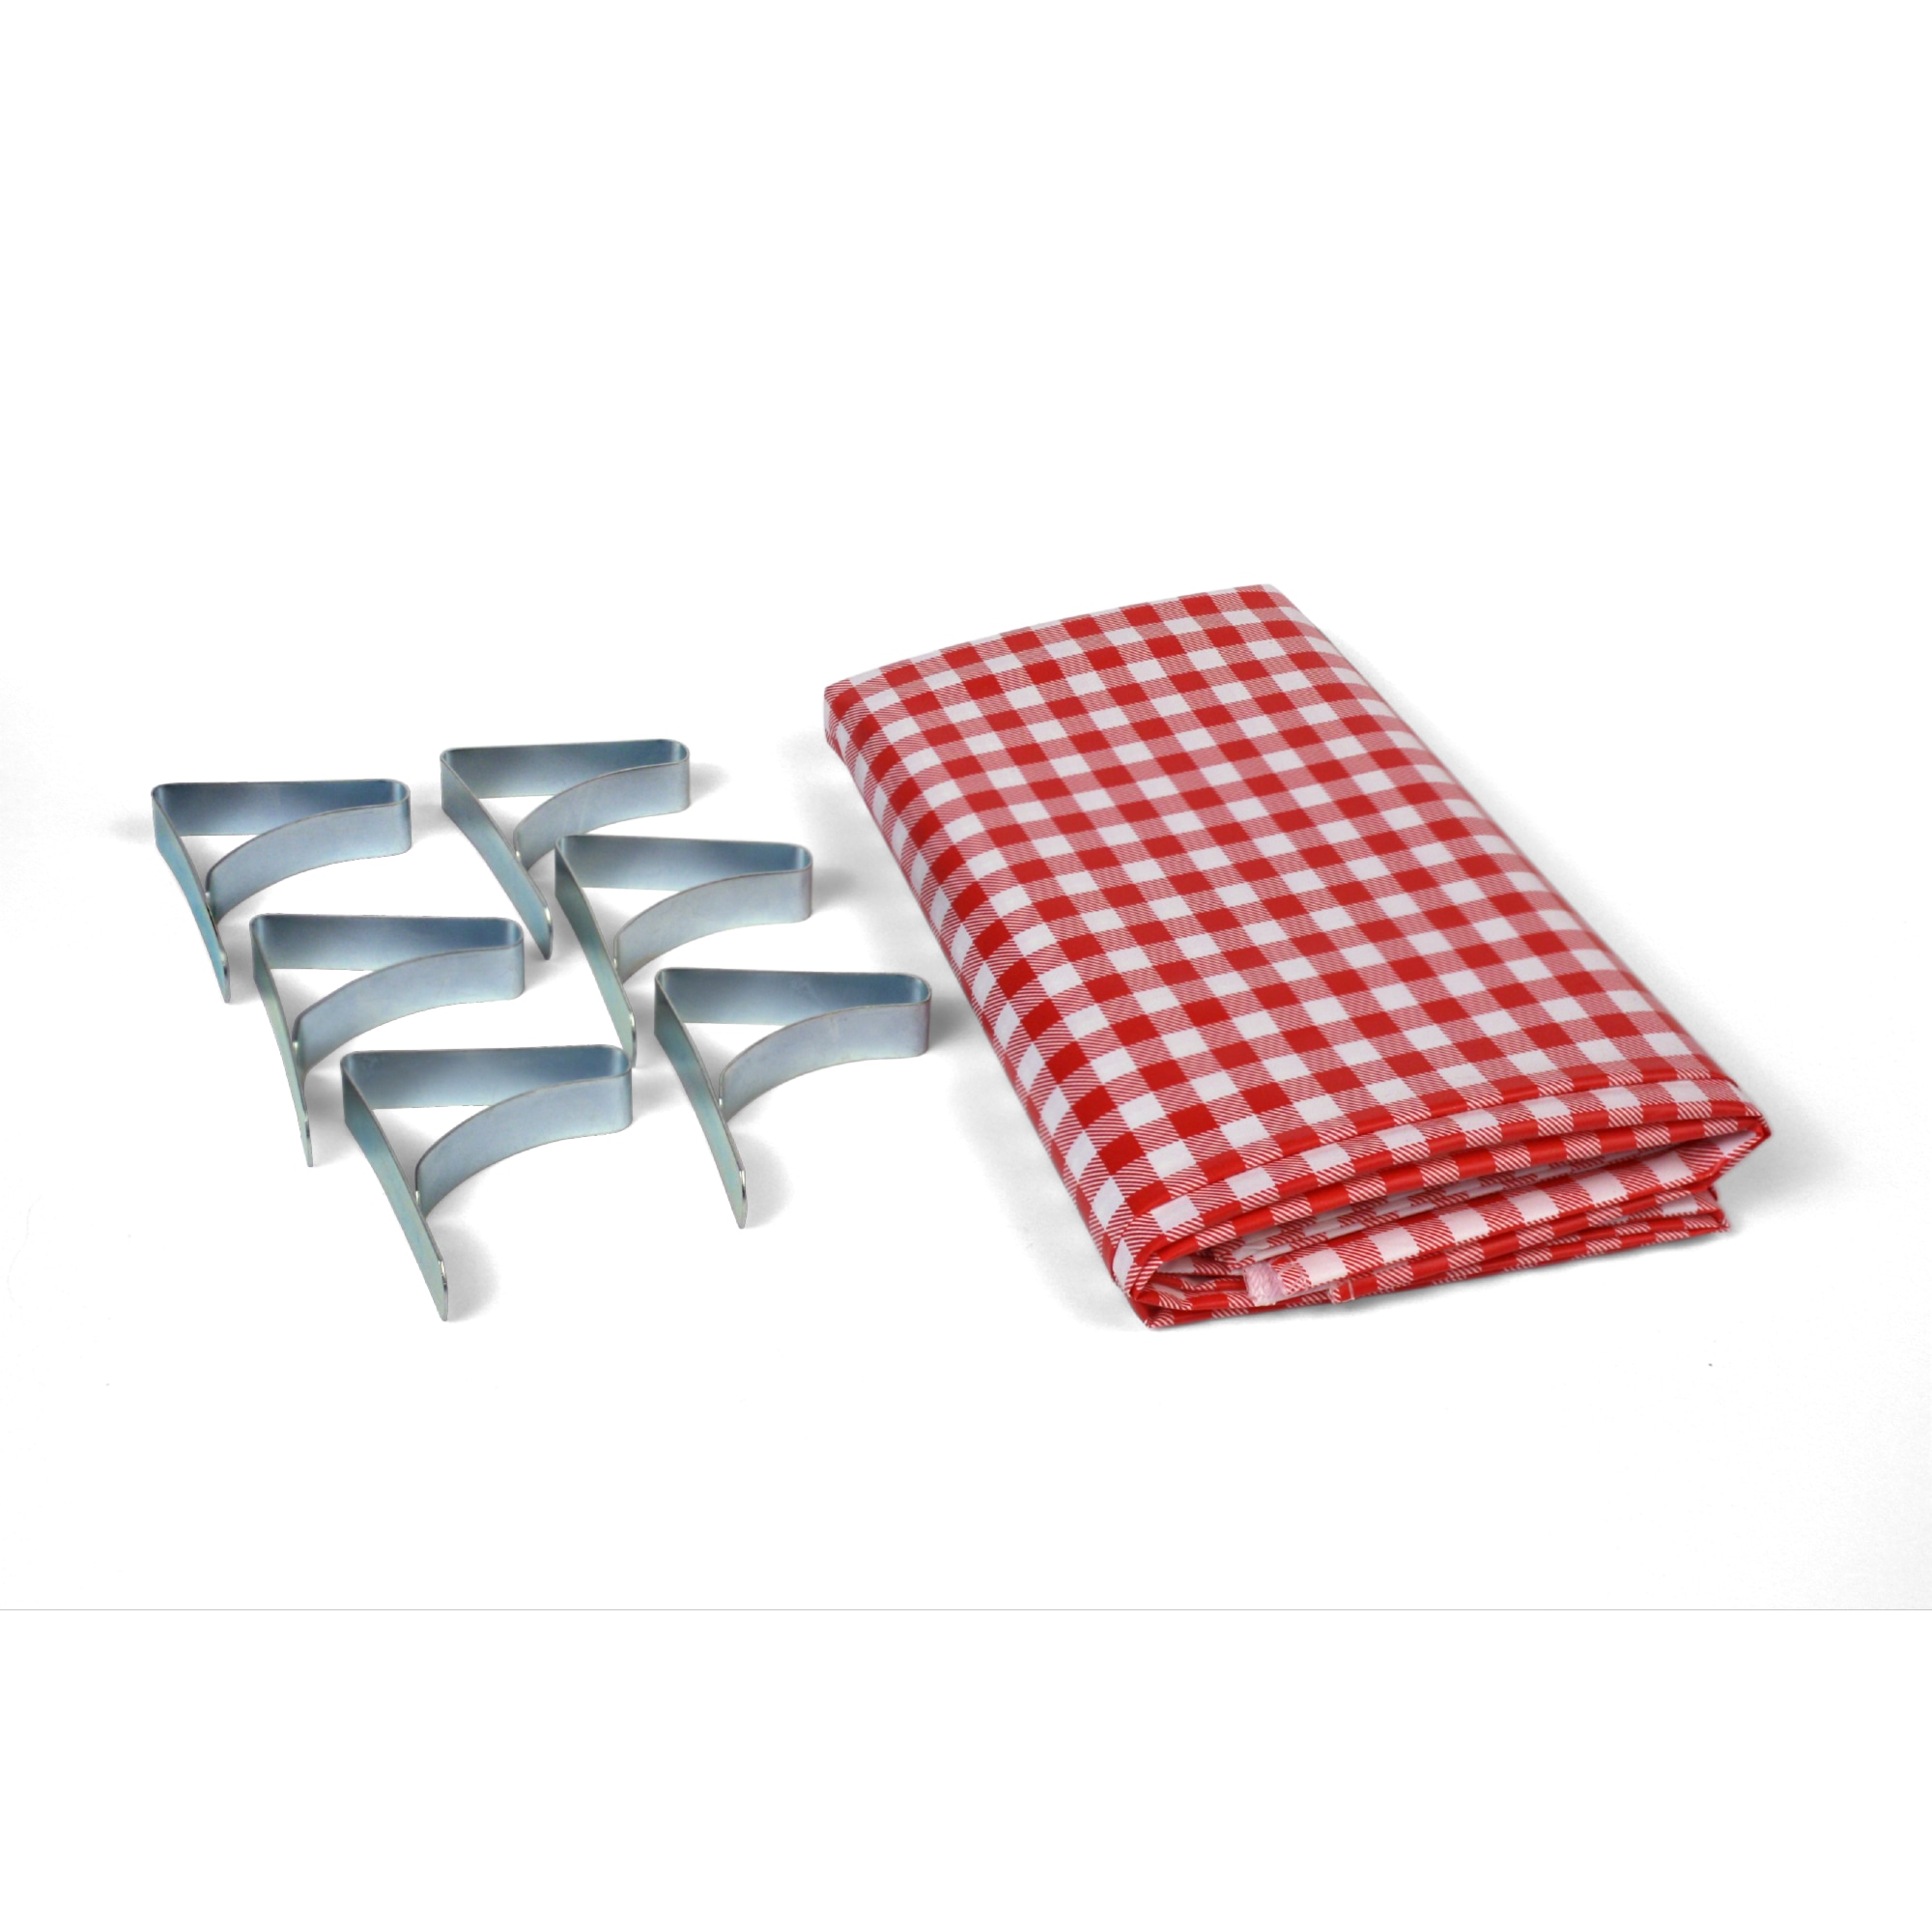 Tablecloth Combo Pack